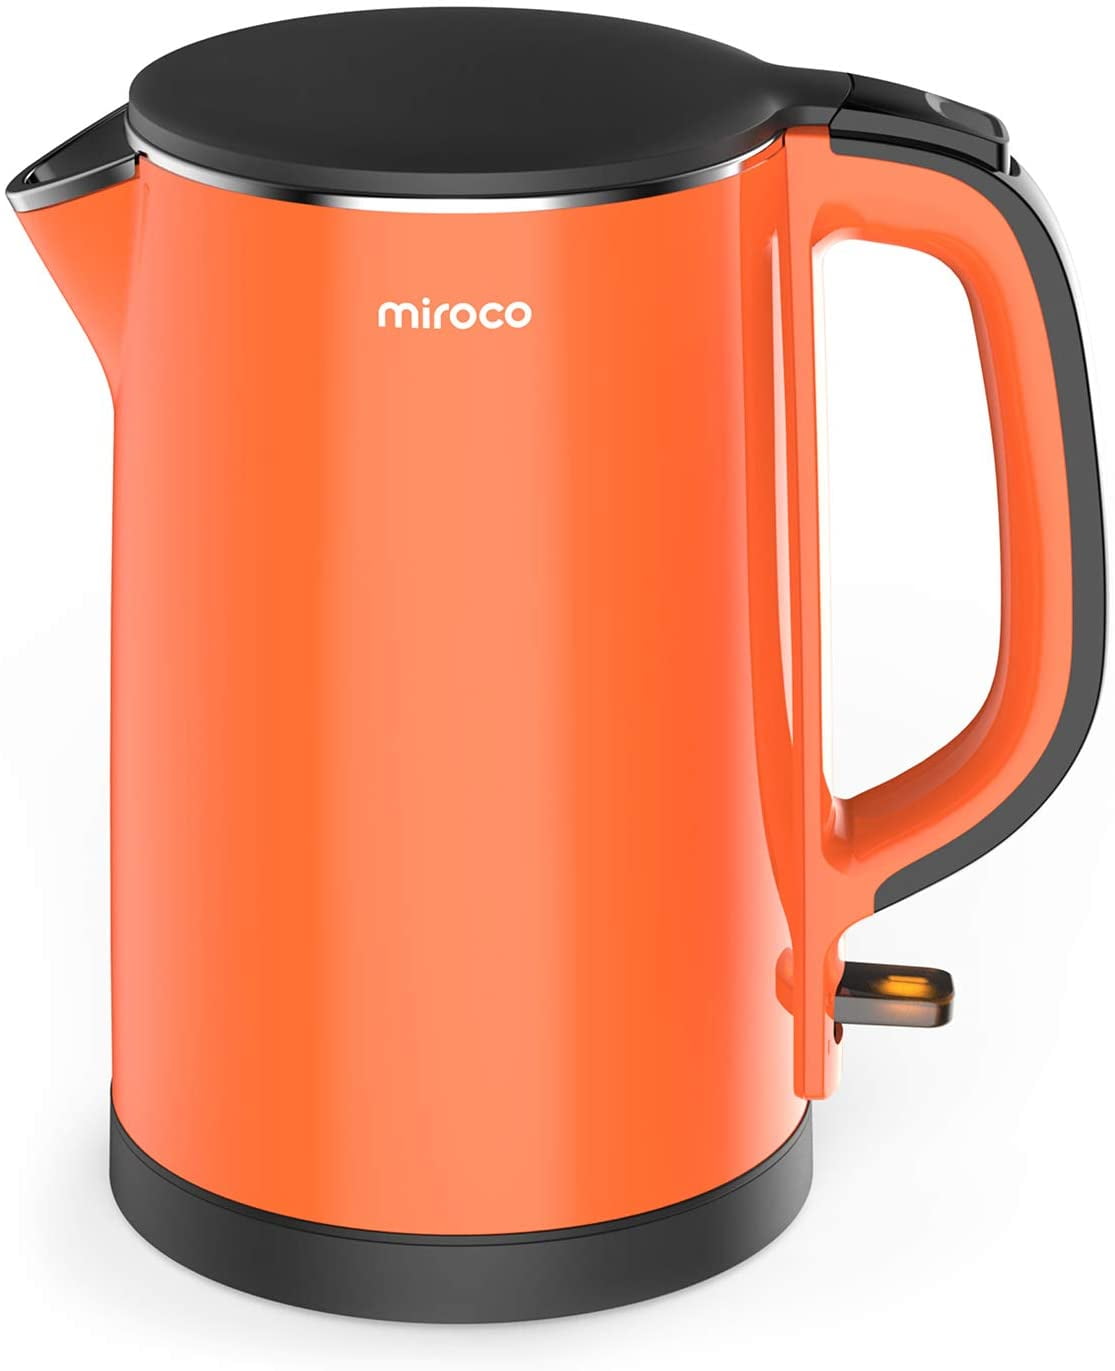 Electric Kettle Miroco 1.5L Double Wall 100% Stainless Steel 1500W